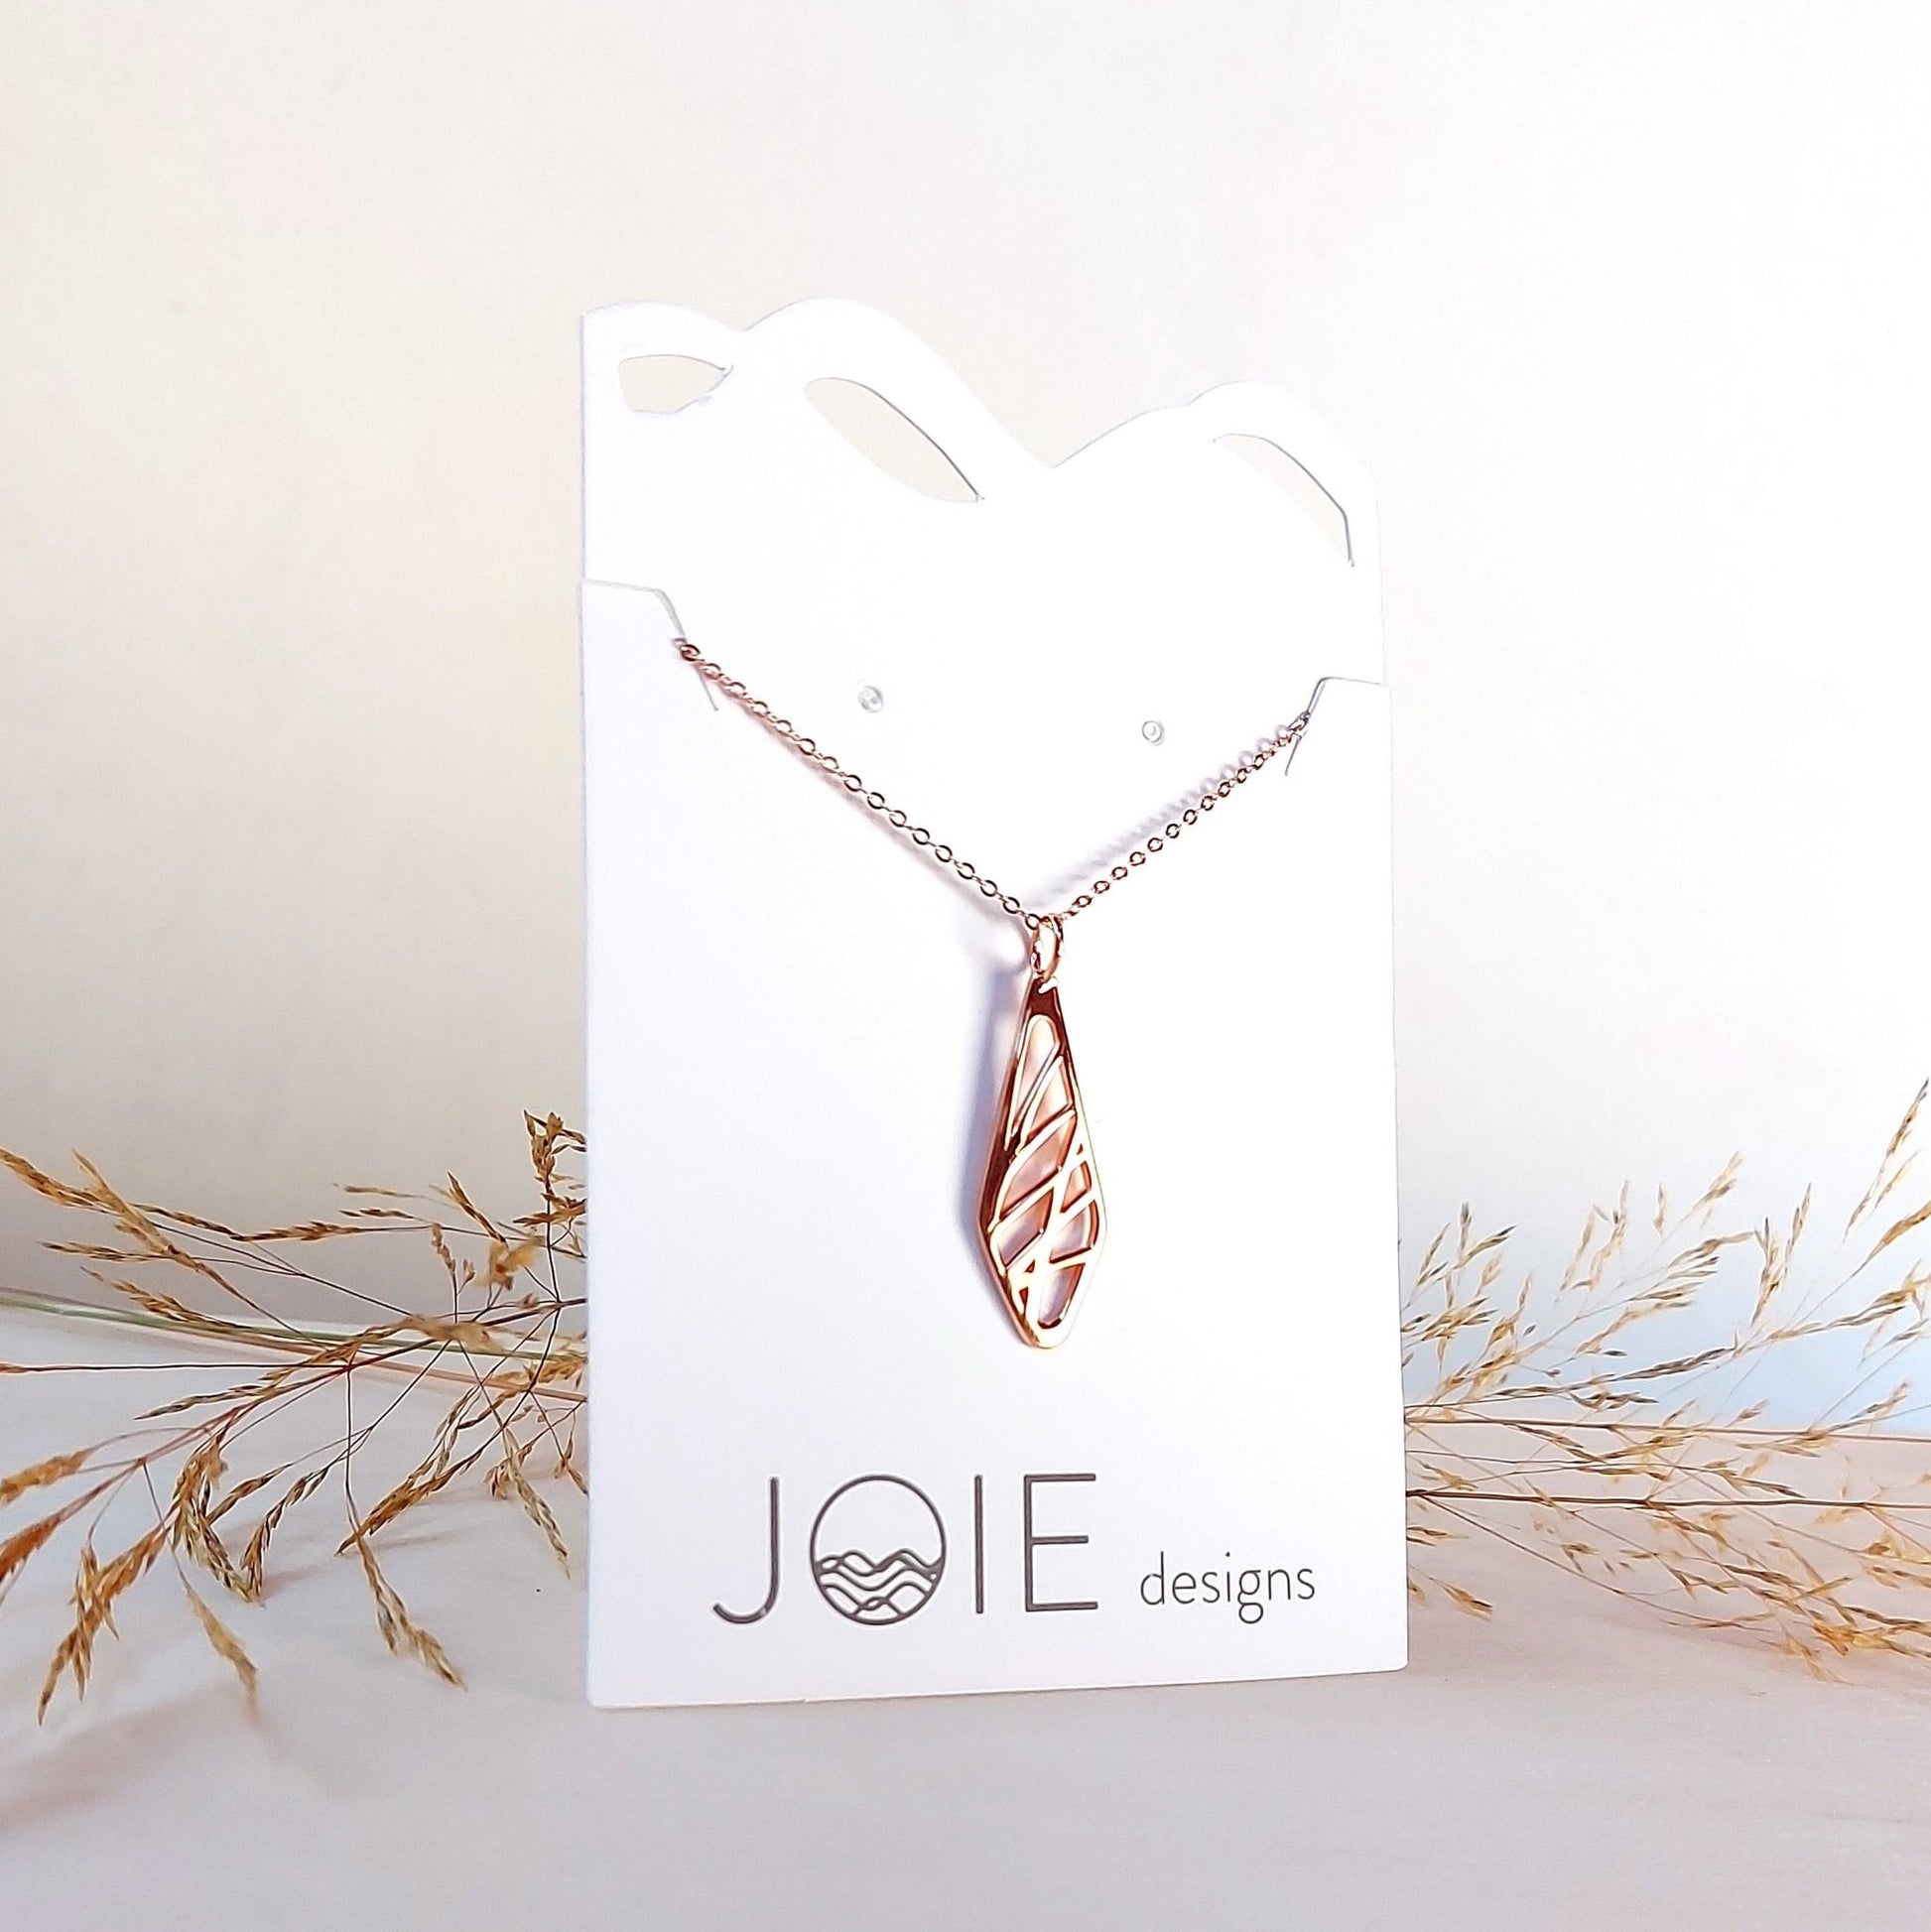 18k plated yellow gold diamond shaped pendant necklace with grass designs shown on jewelry card and dried grass in background